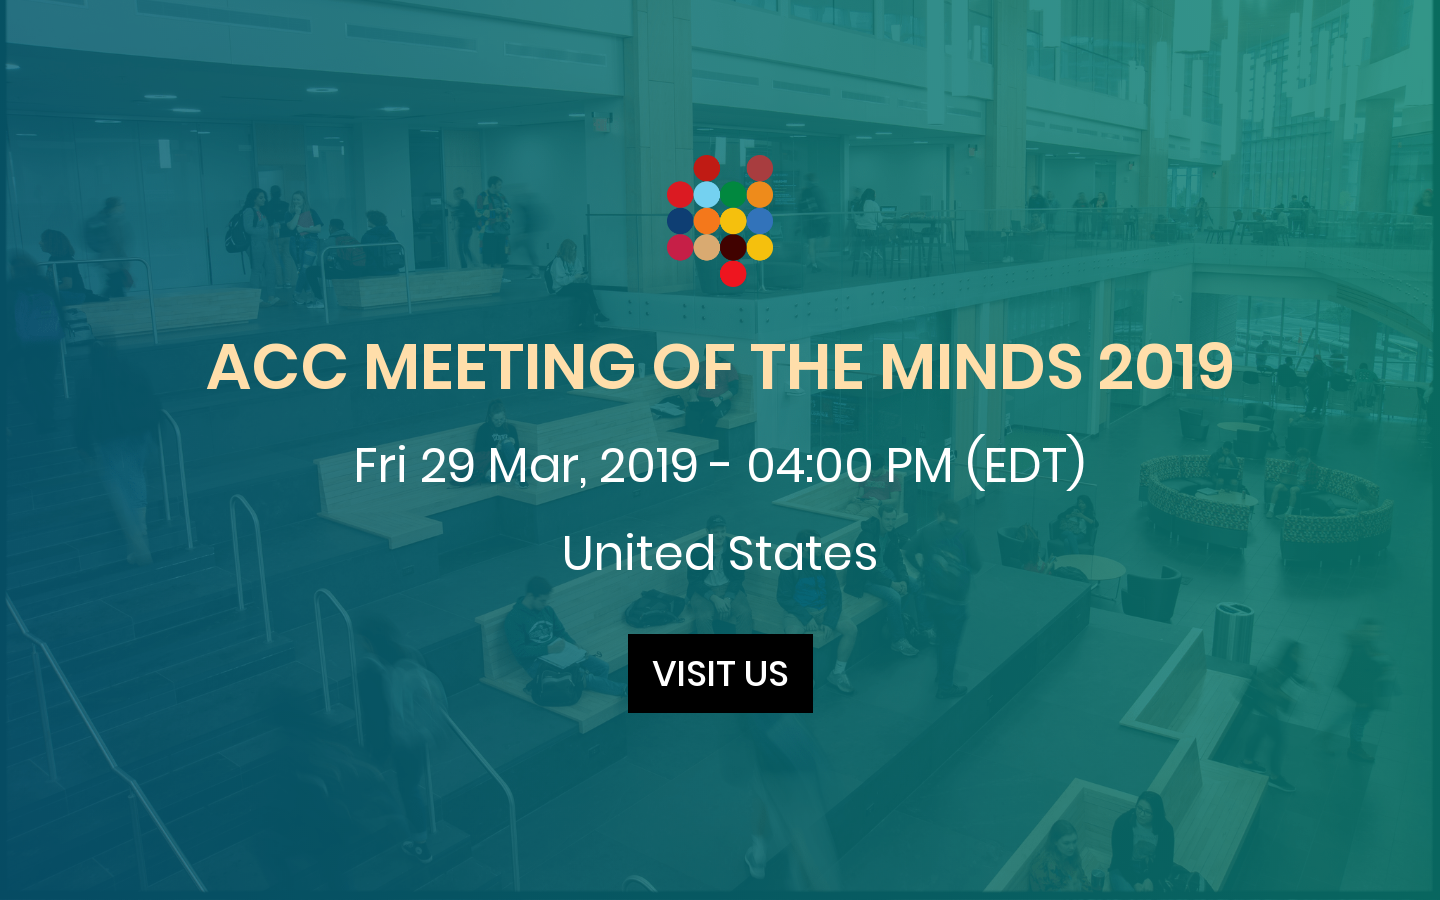 ACC MEETING OF THE MINDS 2019